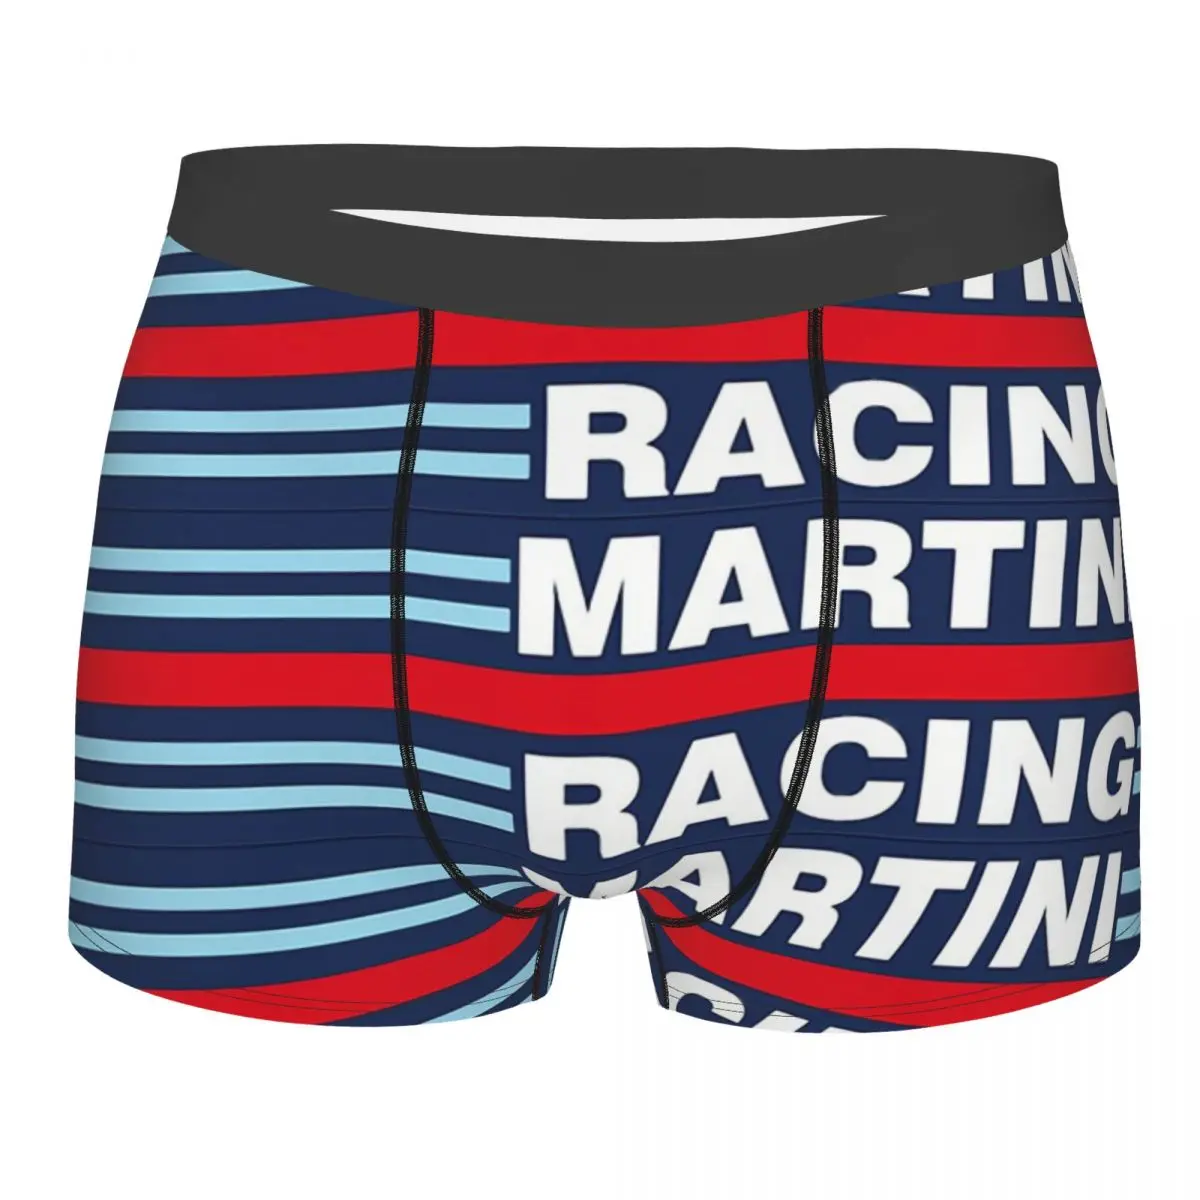 

Martini Racing Stripe Man's Boxer Briefs Car Racing Highly Breathable Underpants High Quality Print Shorts Gift Idea